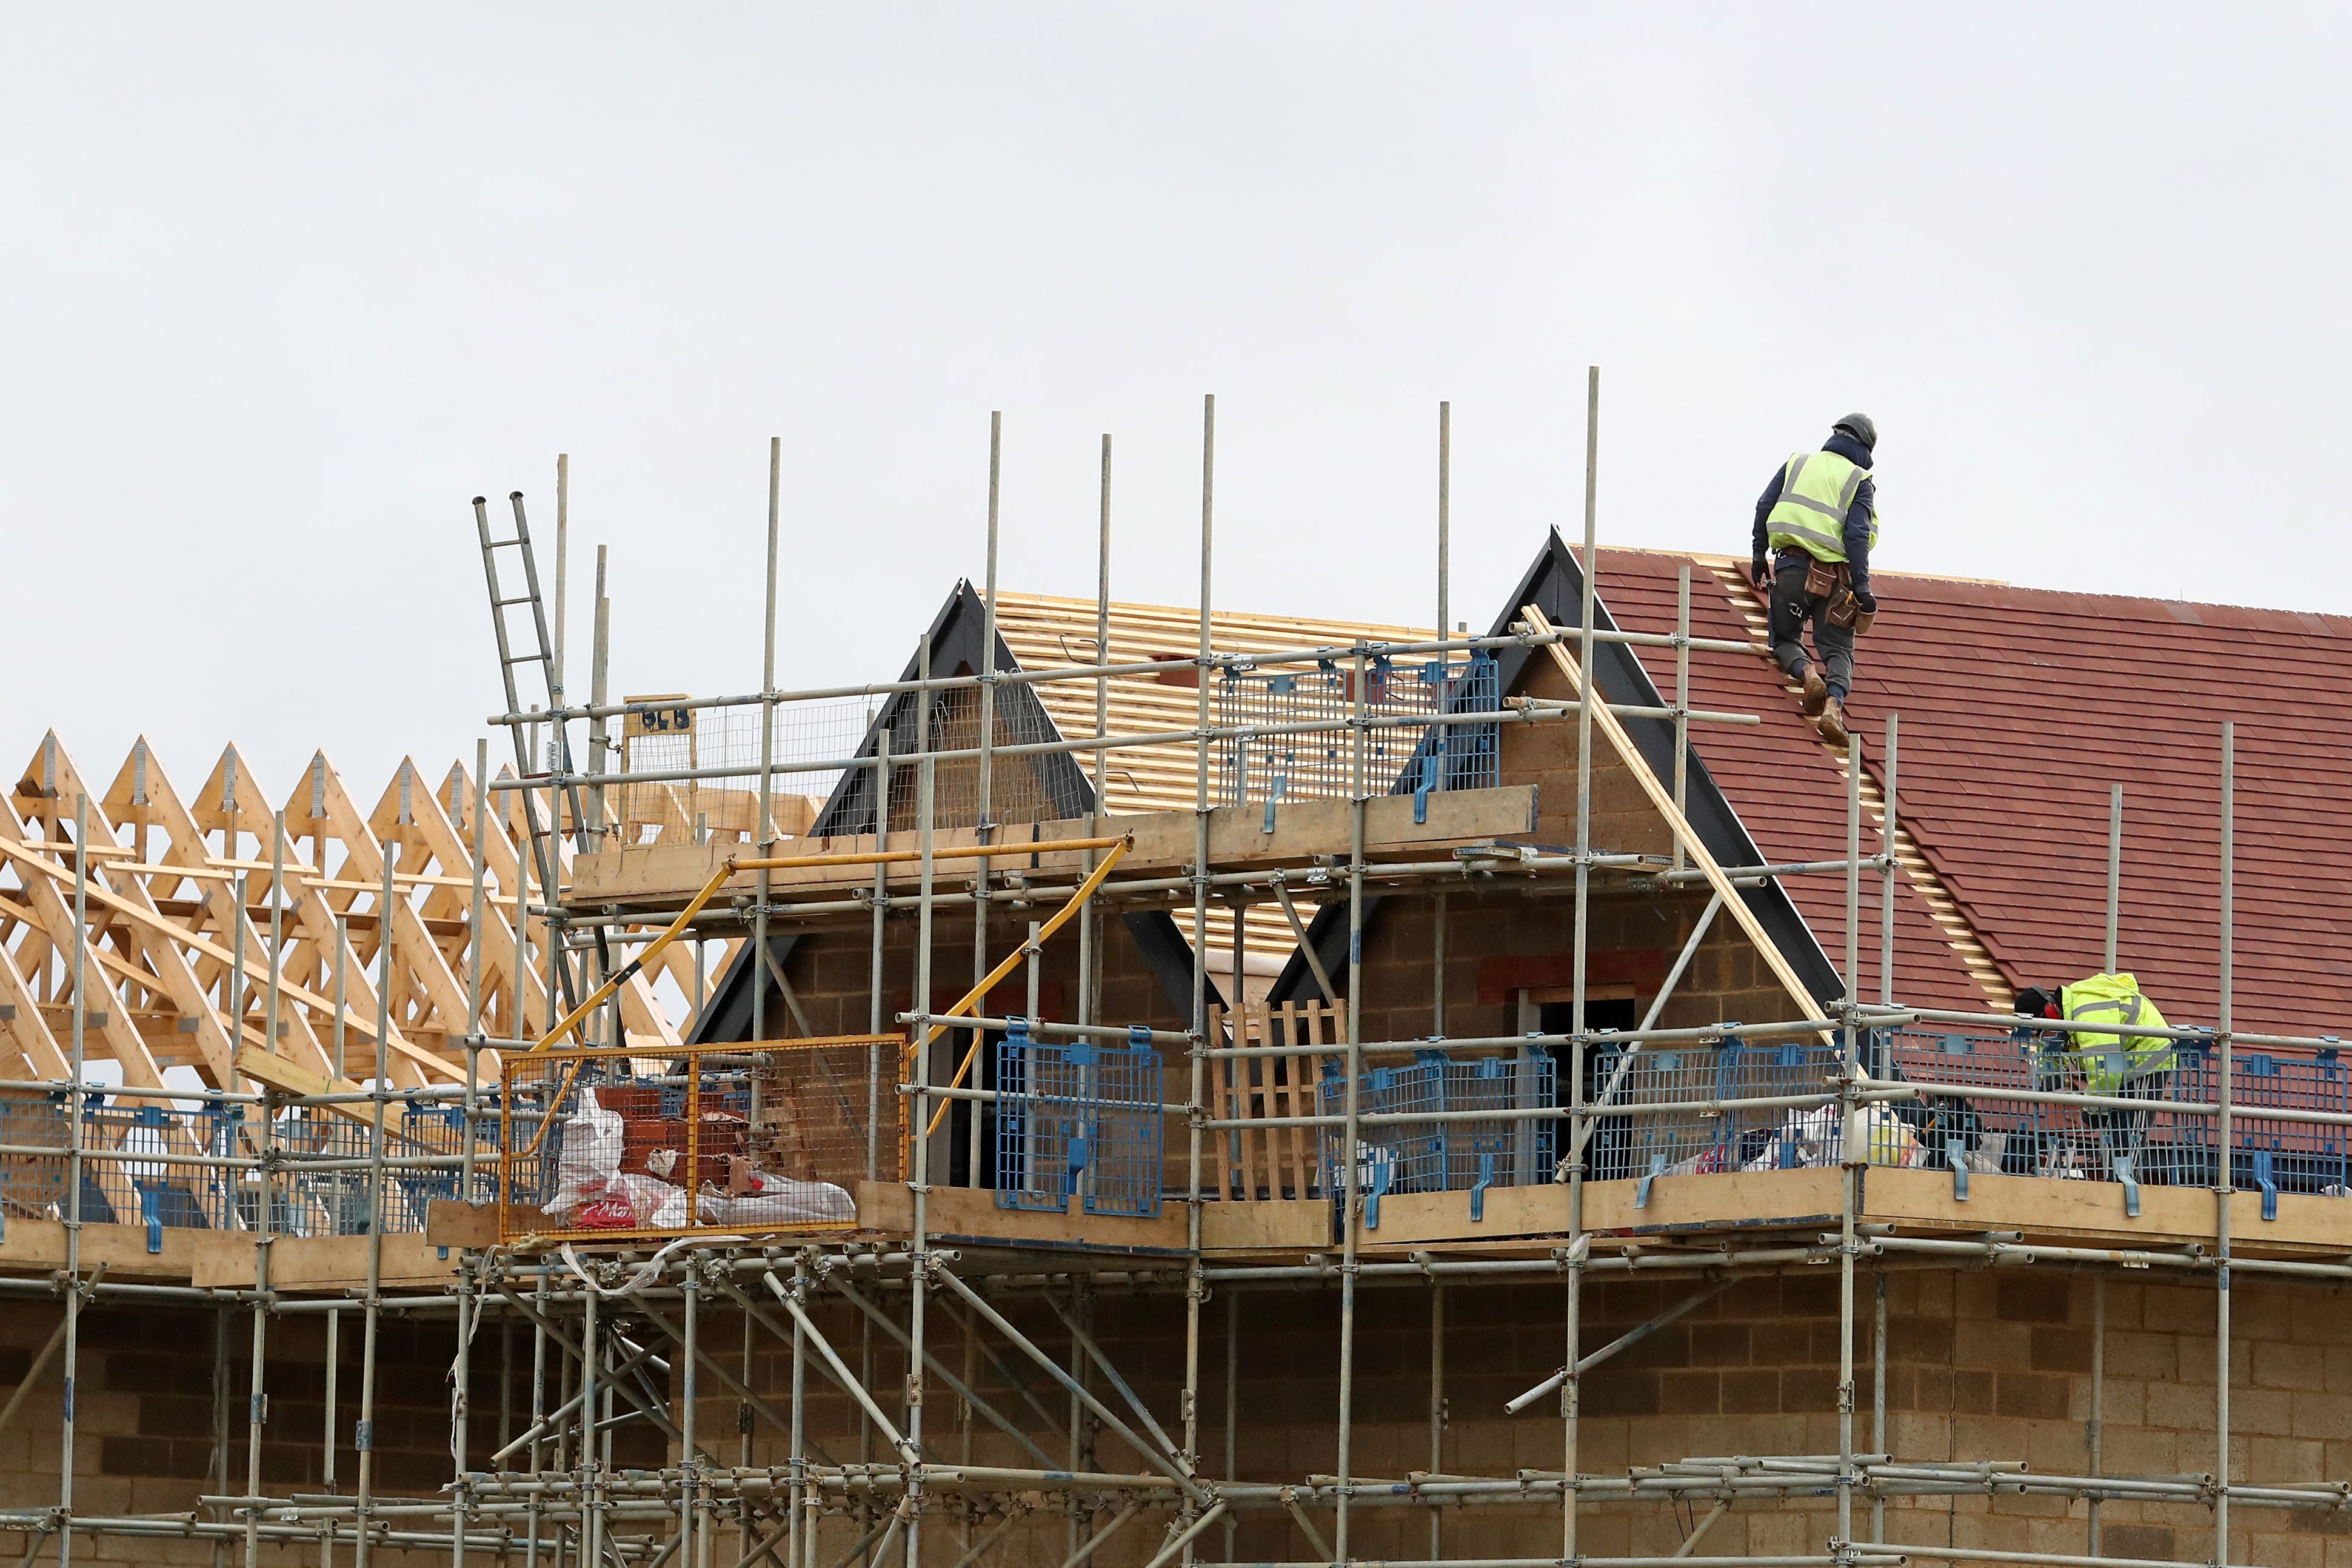 The change to the Levelling up and Regeneration Bill would make the target of building 300,000 homes a year in England advisory rather than mandatory